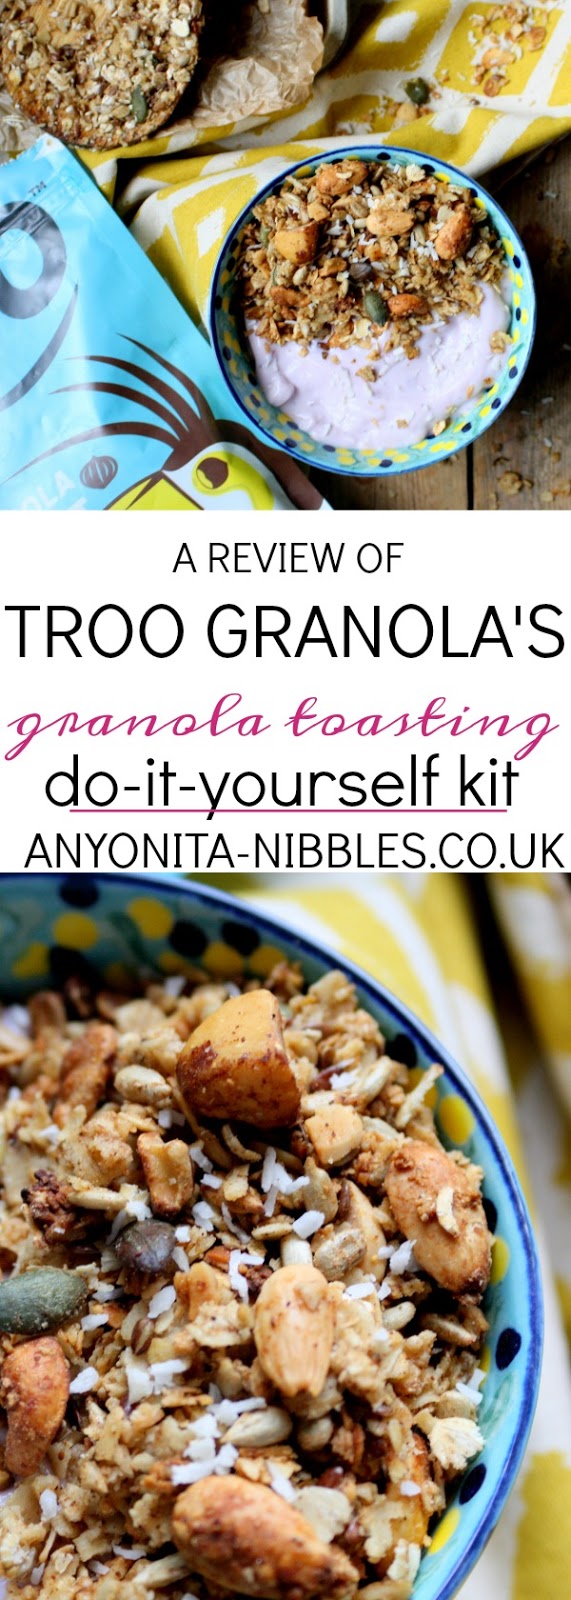 Rethink breakfast and transform your morning with a gluten free, vegan-friendly toast-it-yourself granola from Troo!